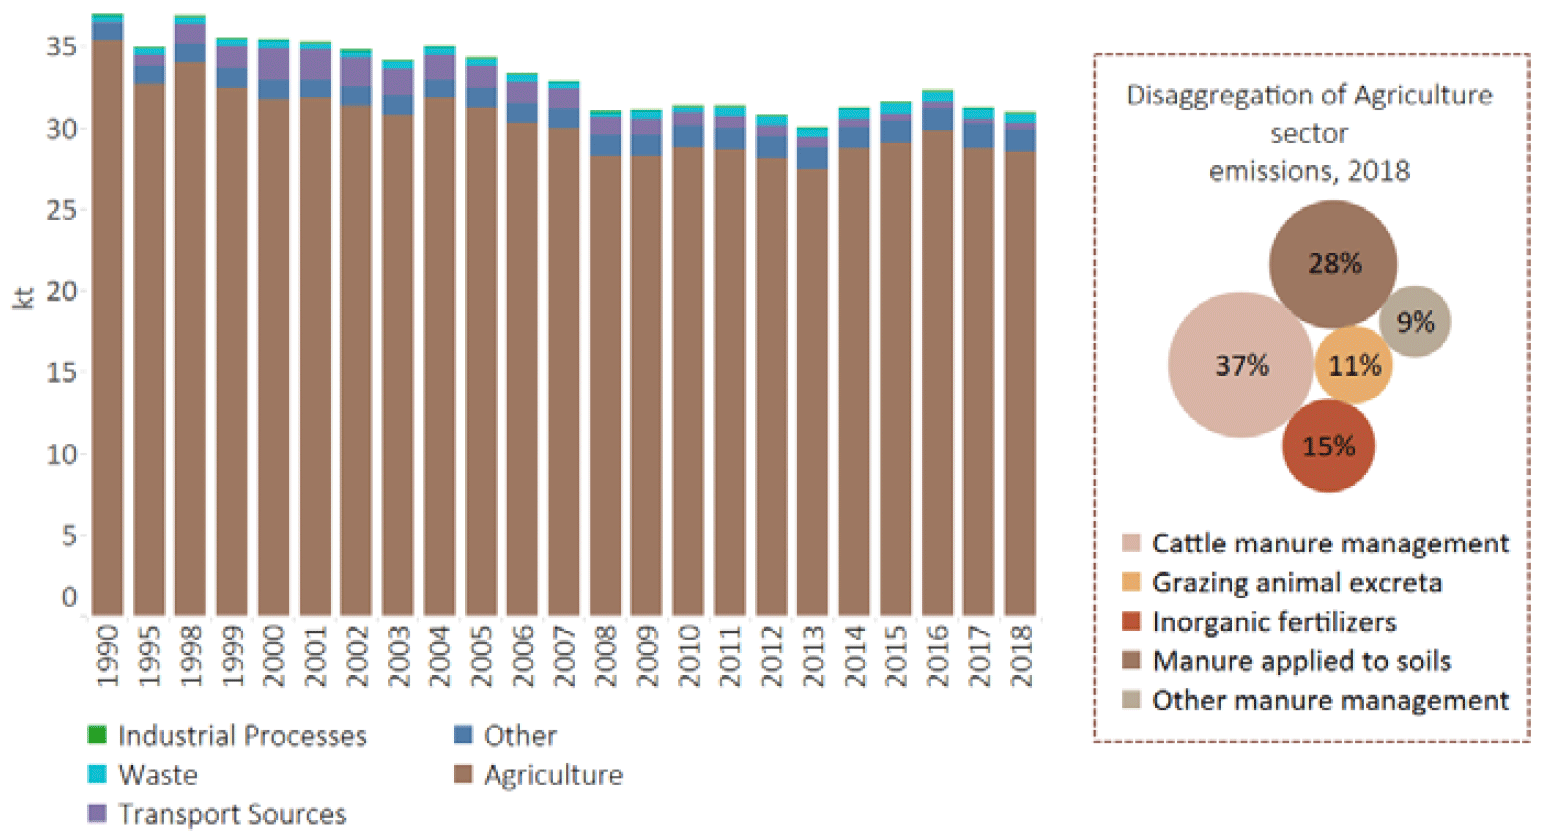 Ammonia emissions have declined by 16% since 1990. Agriculture sources have dominated the inventory throughout the time-series, with cattle manure management accounting for at least 30% of the emissions from this sector across the entire time-series.